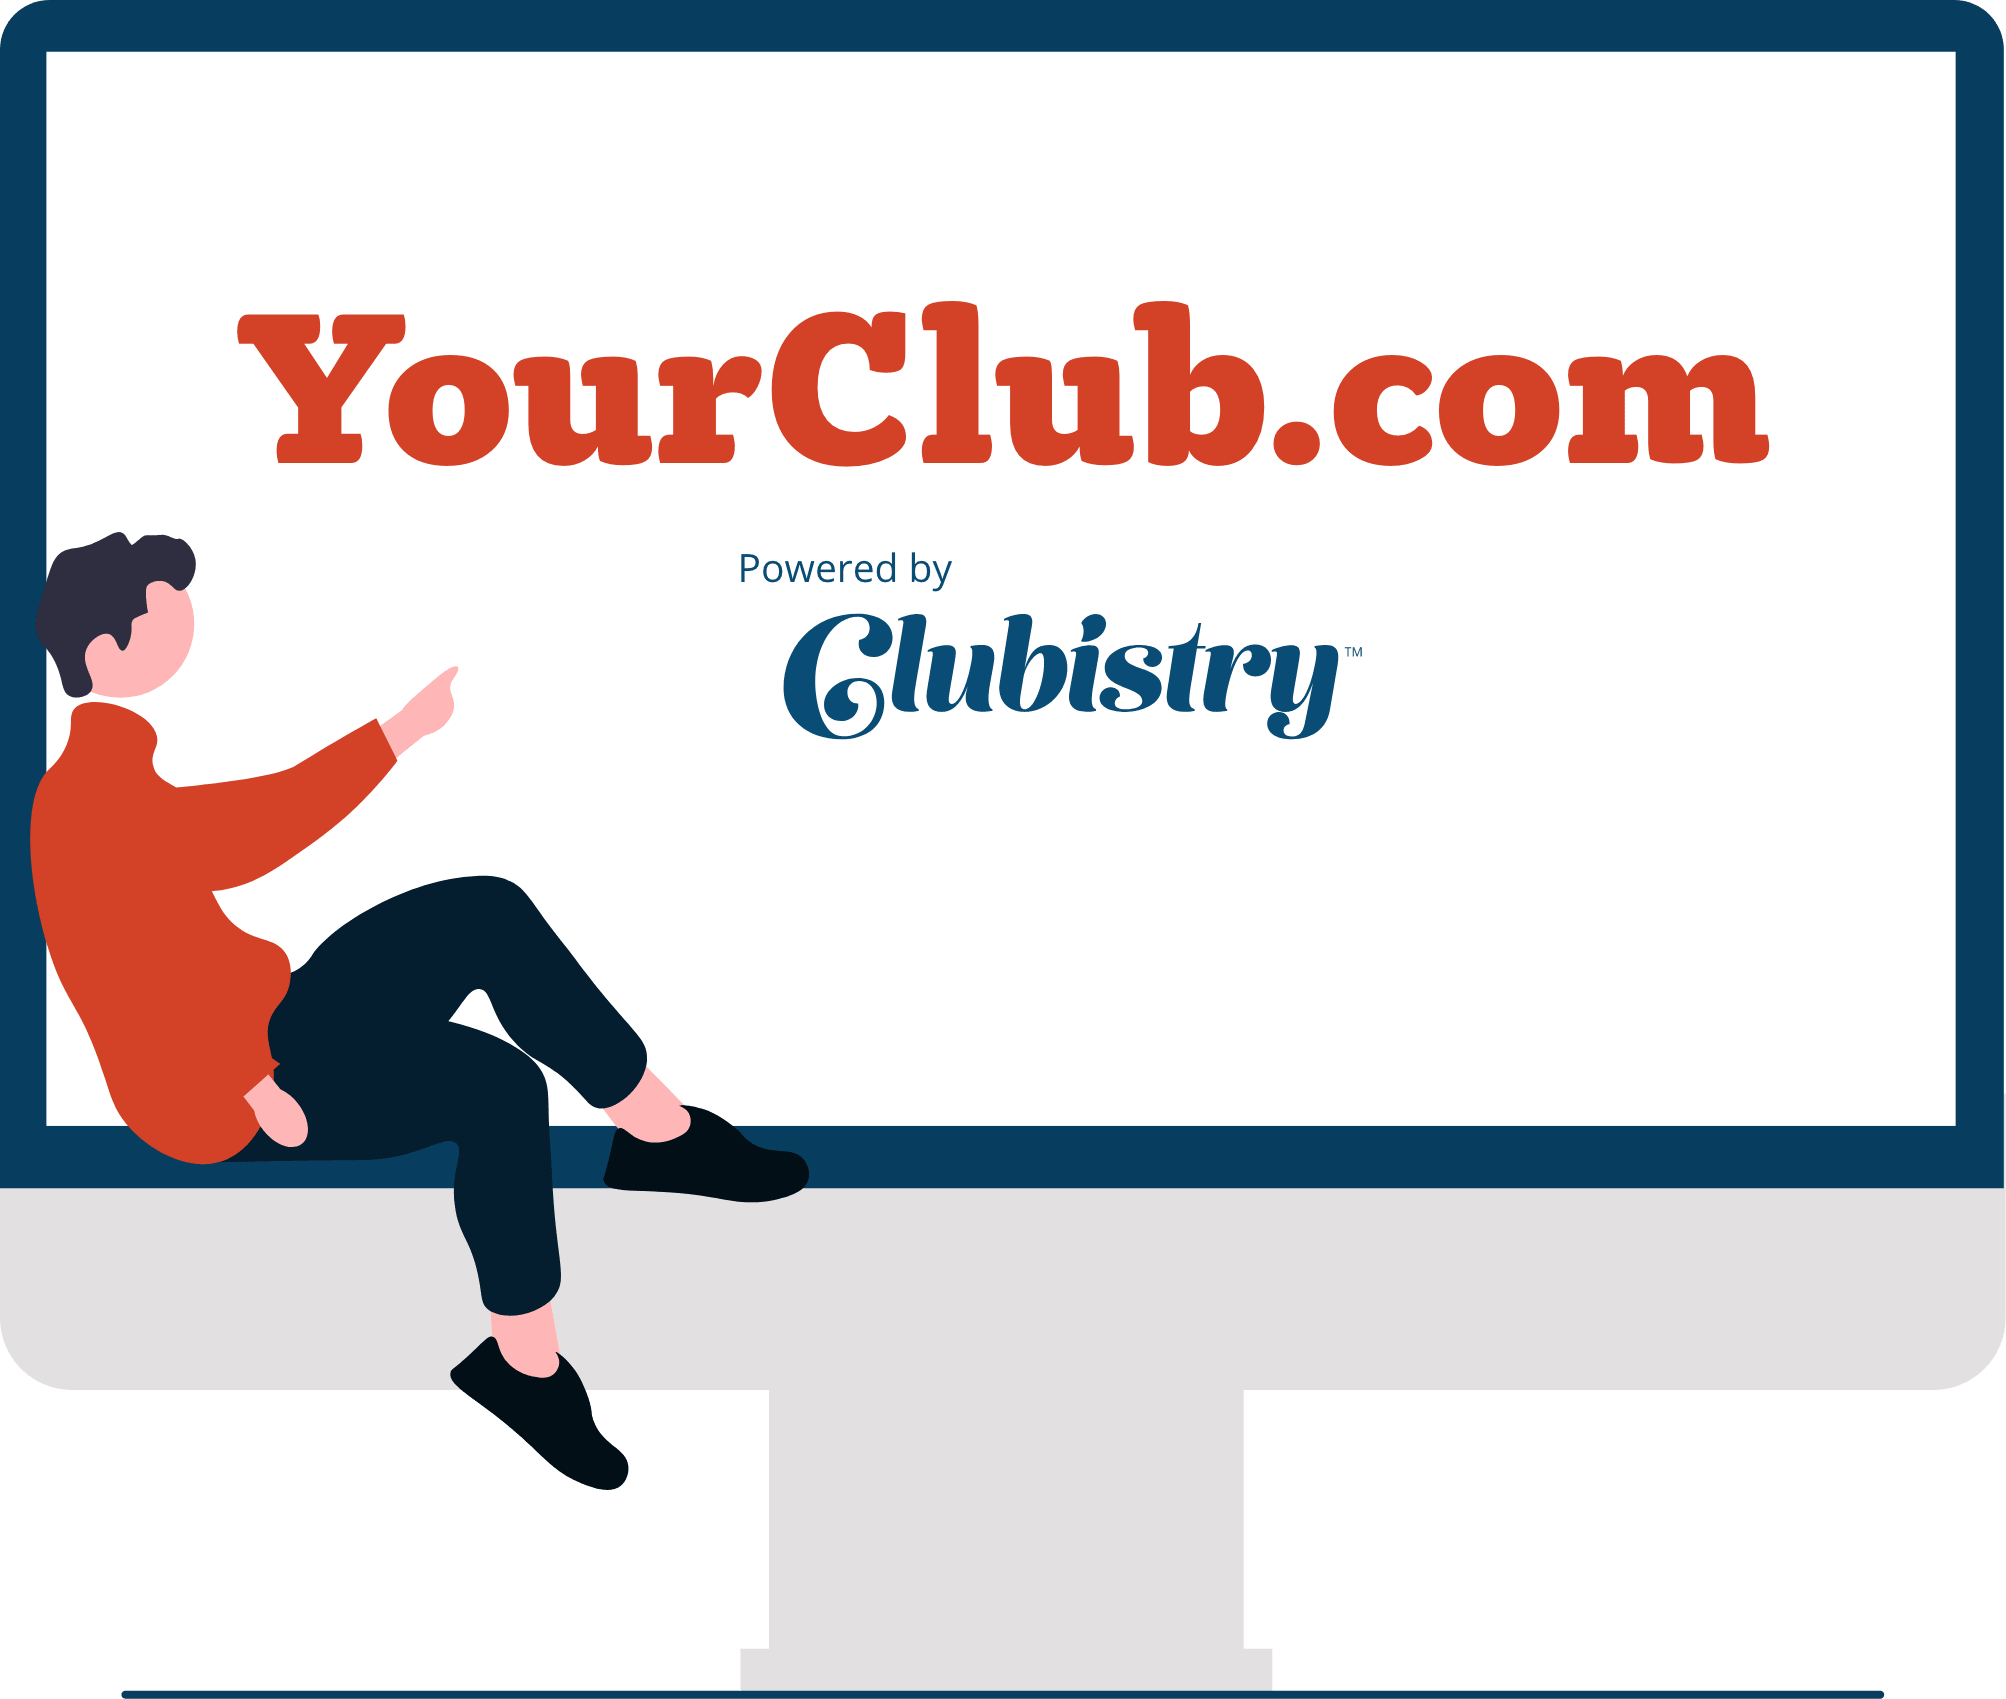 Your club website, powered by Clubistry